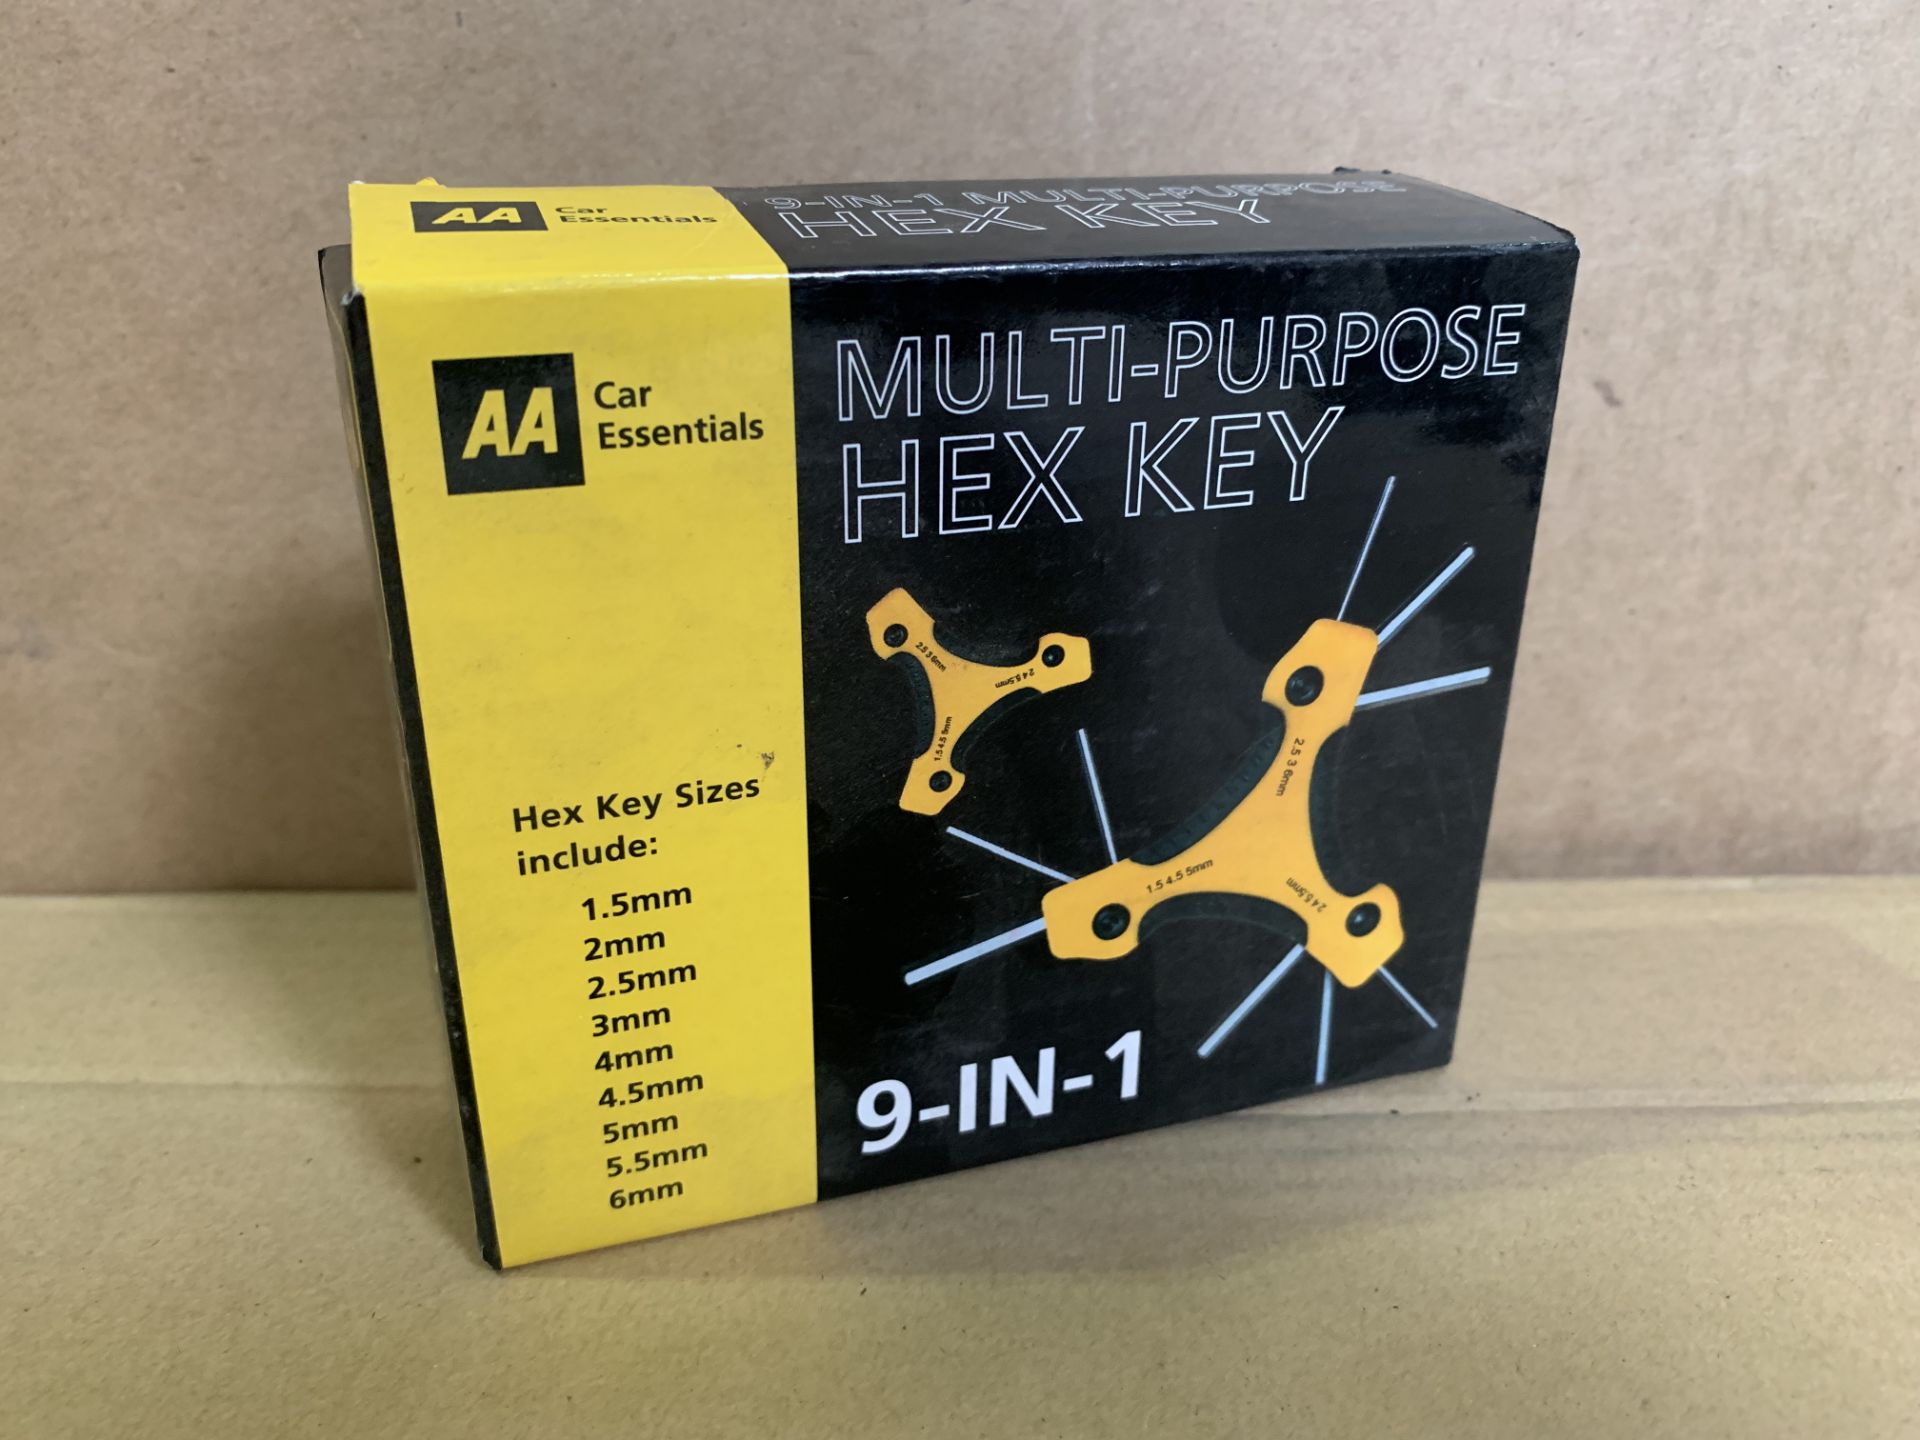 30 X NEW BOXED AA MULTI-PURPOSE HEX KEY SET 9 IN 1. RRP £15 EACH